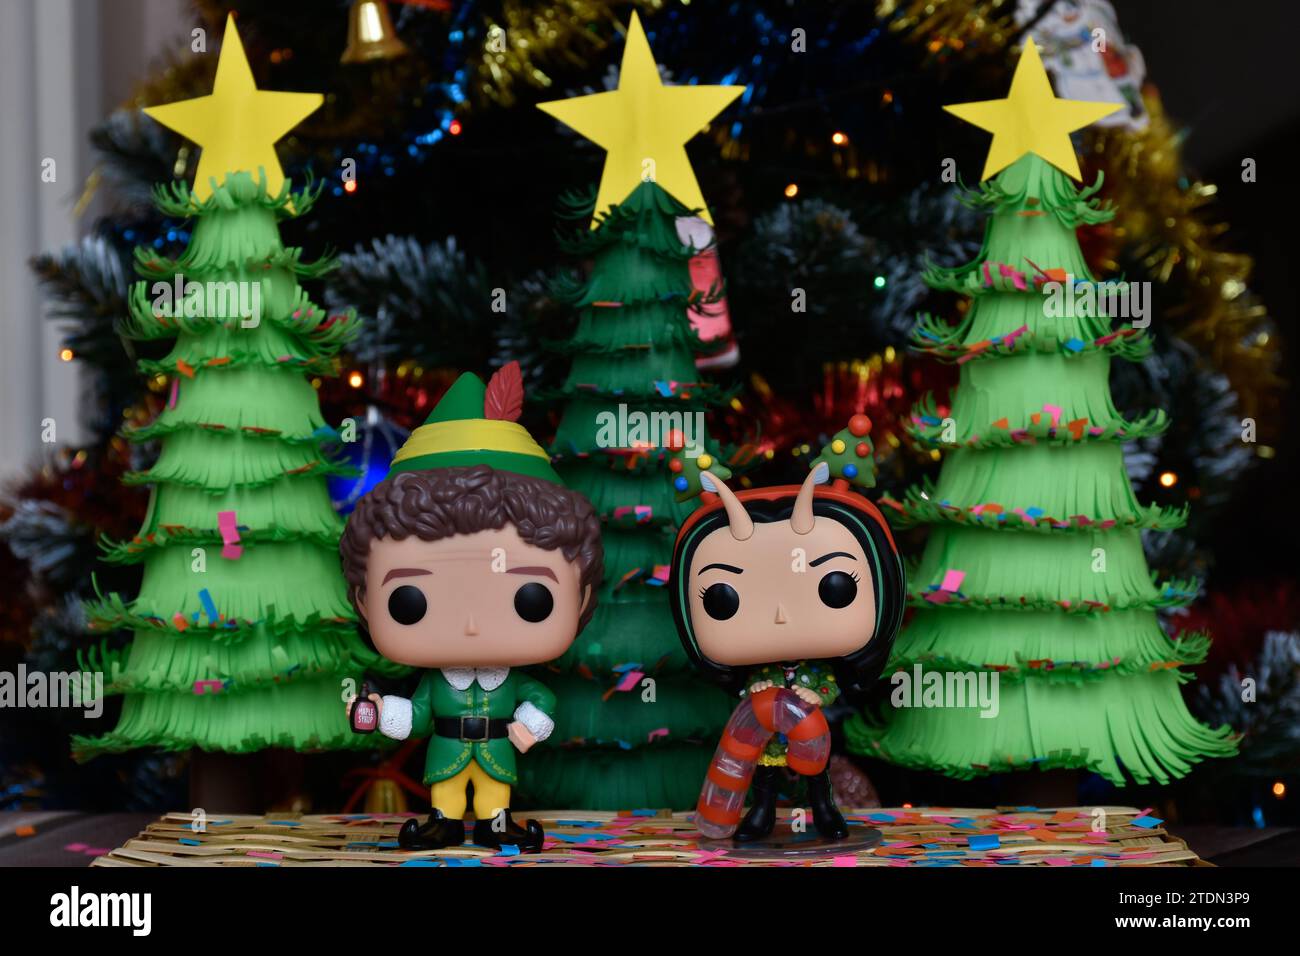 Funko Pop action figures of Buddy from movie Elf and Marvel superhero Mantis from Guardians of the Galaxy. Handmade paper Christmas trees, confetti. Stock Photo